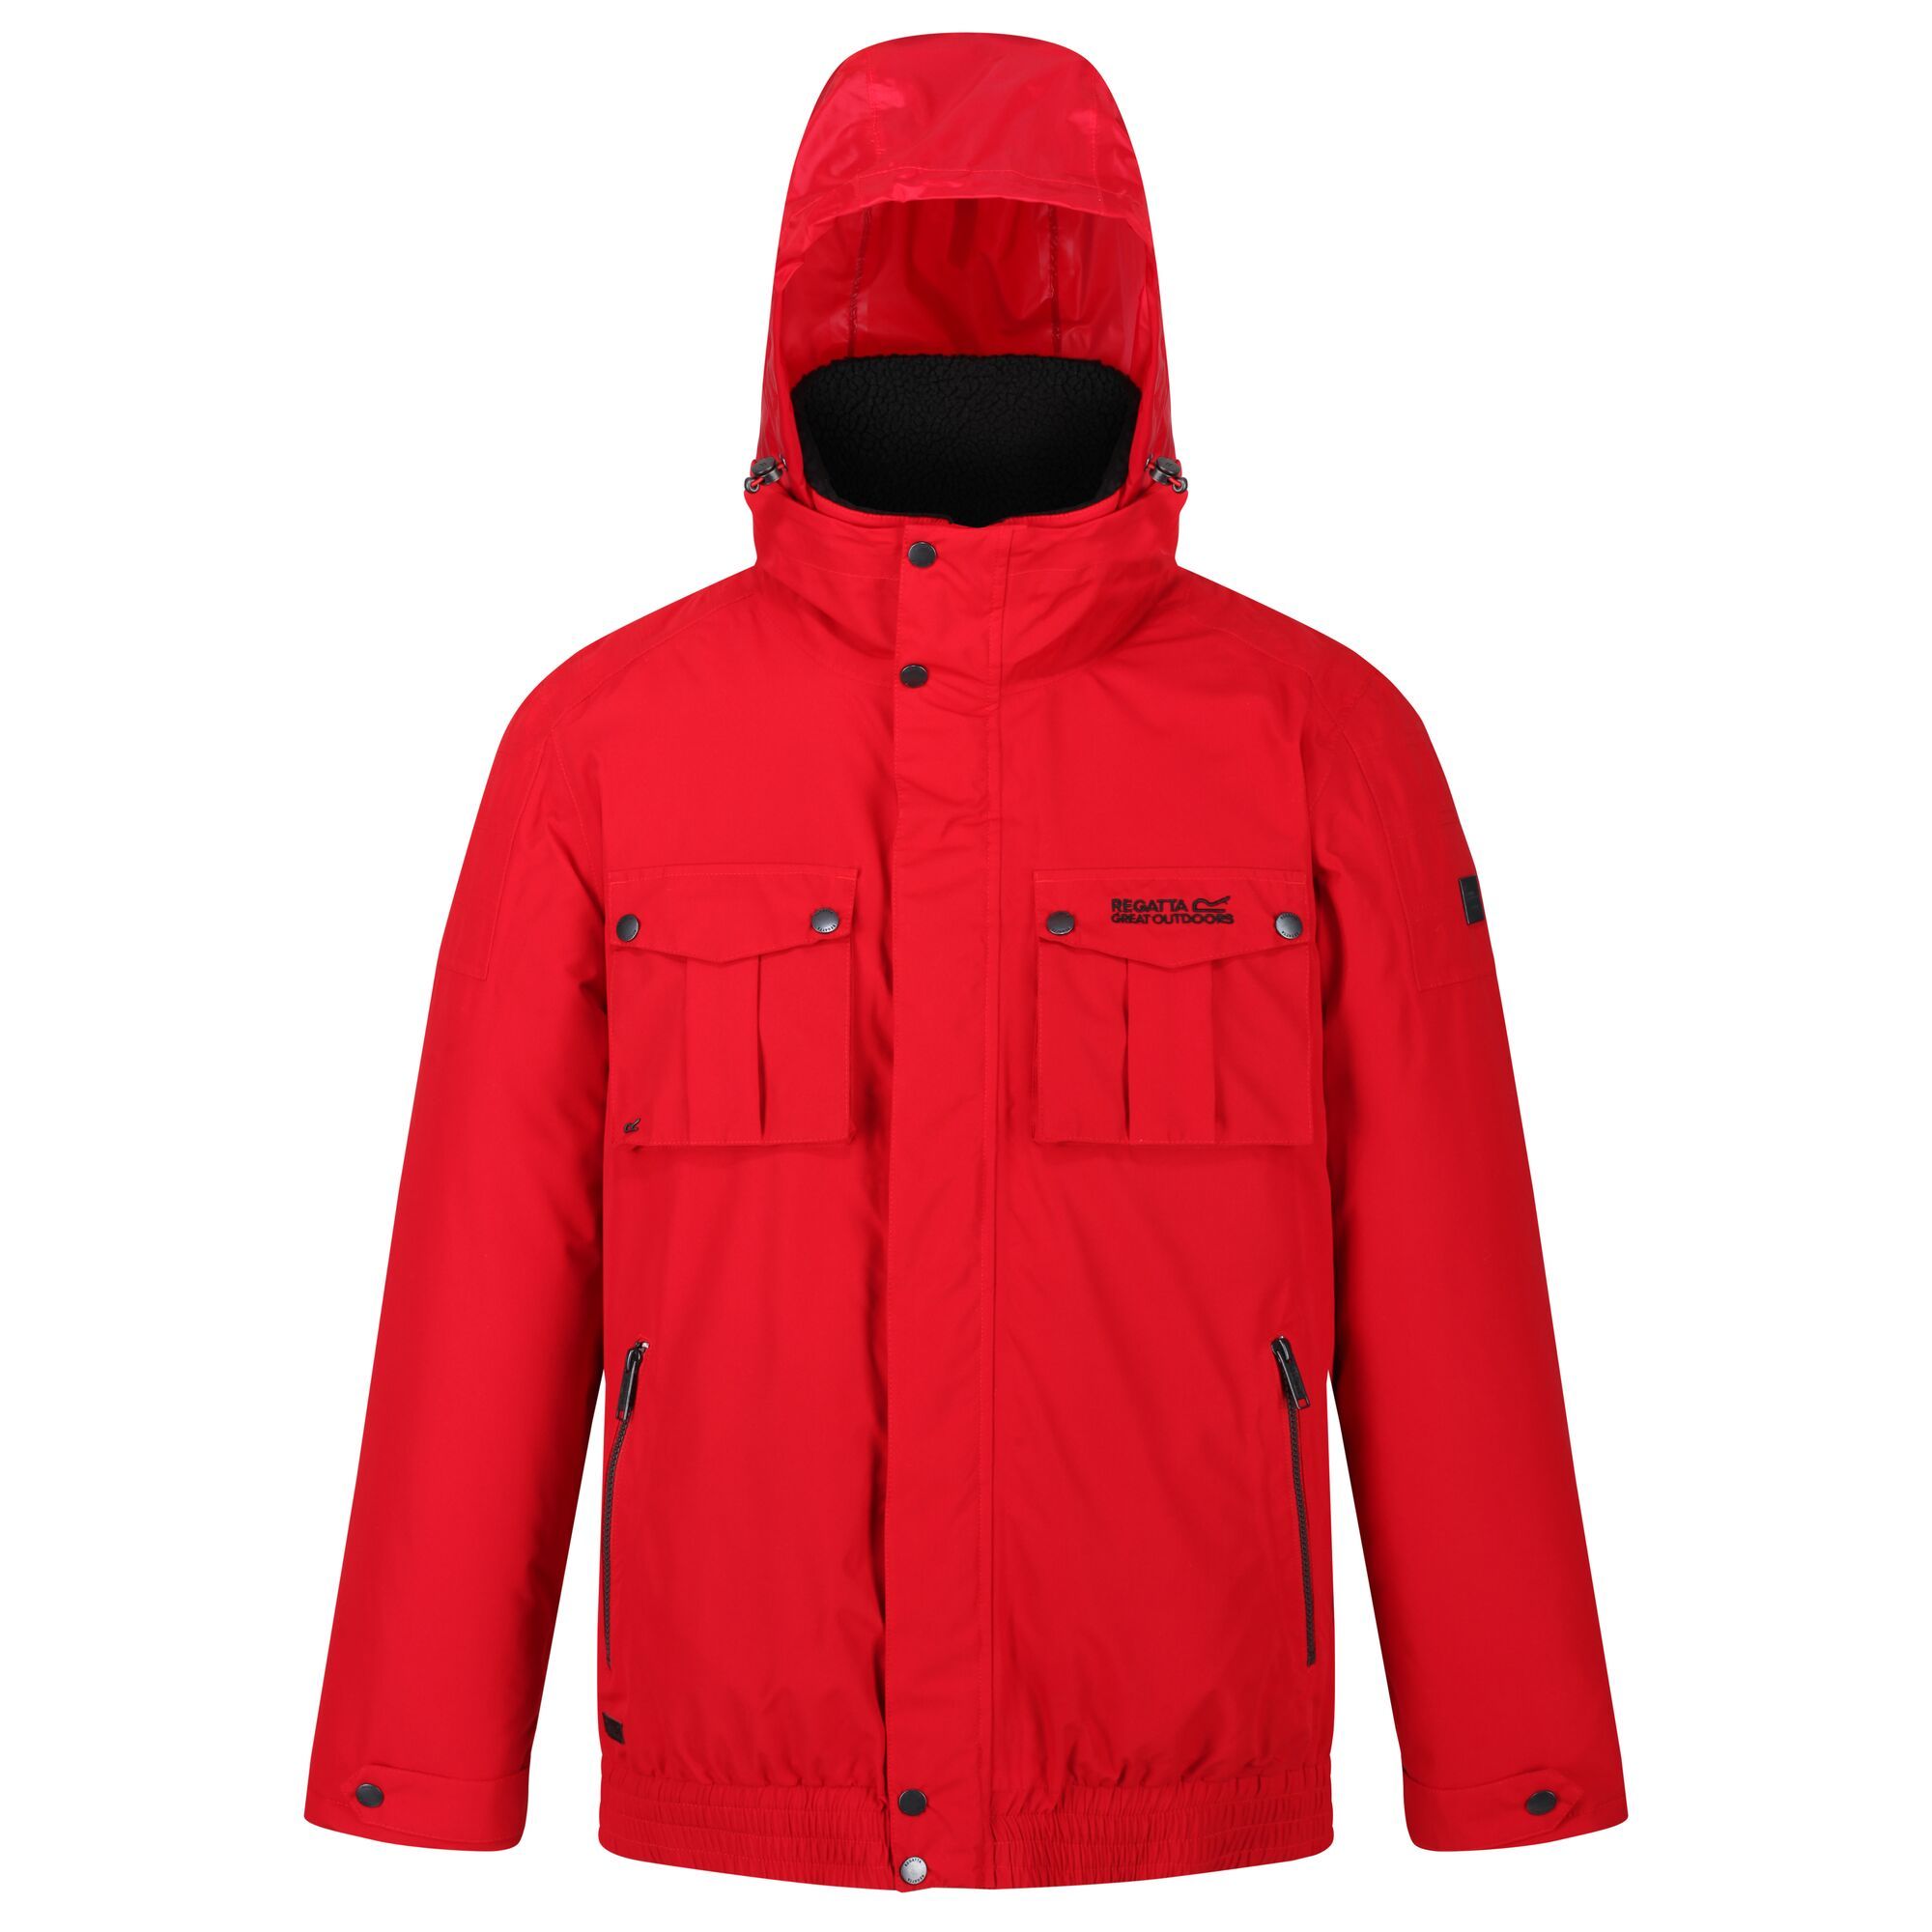 Material: polyester: 100%. Waterproof and breathable Isotex 5000 peached polyester fabric. Breathability rating: 5,000g/m2/24hrs. Taped seams. Durable water repellent finish. Polyester taffeta lining. Internal security pocket. Lightweight concealed hood with adjusters. Sherpa fleece inner collar. Adjustable cuffs with snap fastening. 2 zipped lower pockets. 2 chest patch pockets. Elasticated hem. Regatta outdoors badge on left sleeve. Size (chest): (XXS) 32-34in/81-86cm, (XS) 35-36in/89-91.5cm, (S) 37-38in/94-96.5cm, (M) 39-40in/99-101.5cm, (L) 41-42in/104-106.5cm, (XL) 43-44in/109-112cm, (XXL) 46-48in/117-122cm, (3XL) 49-51in/124.5-129.5cm, (4XL) 52-54in/132-137cm, (5XL) 55-57in/140-145cm, (6XL) 58-60in/147-152.5cm.